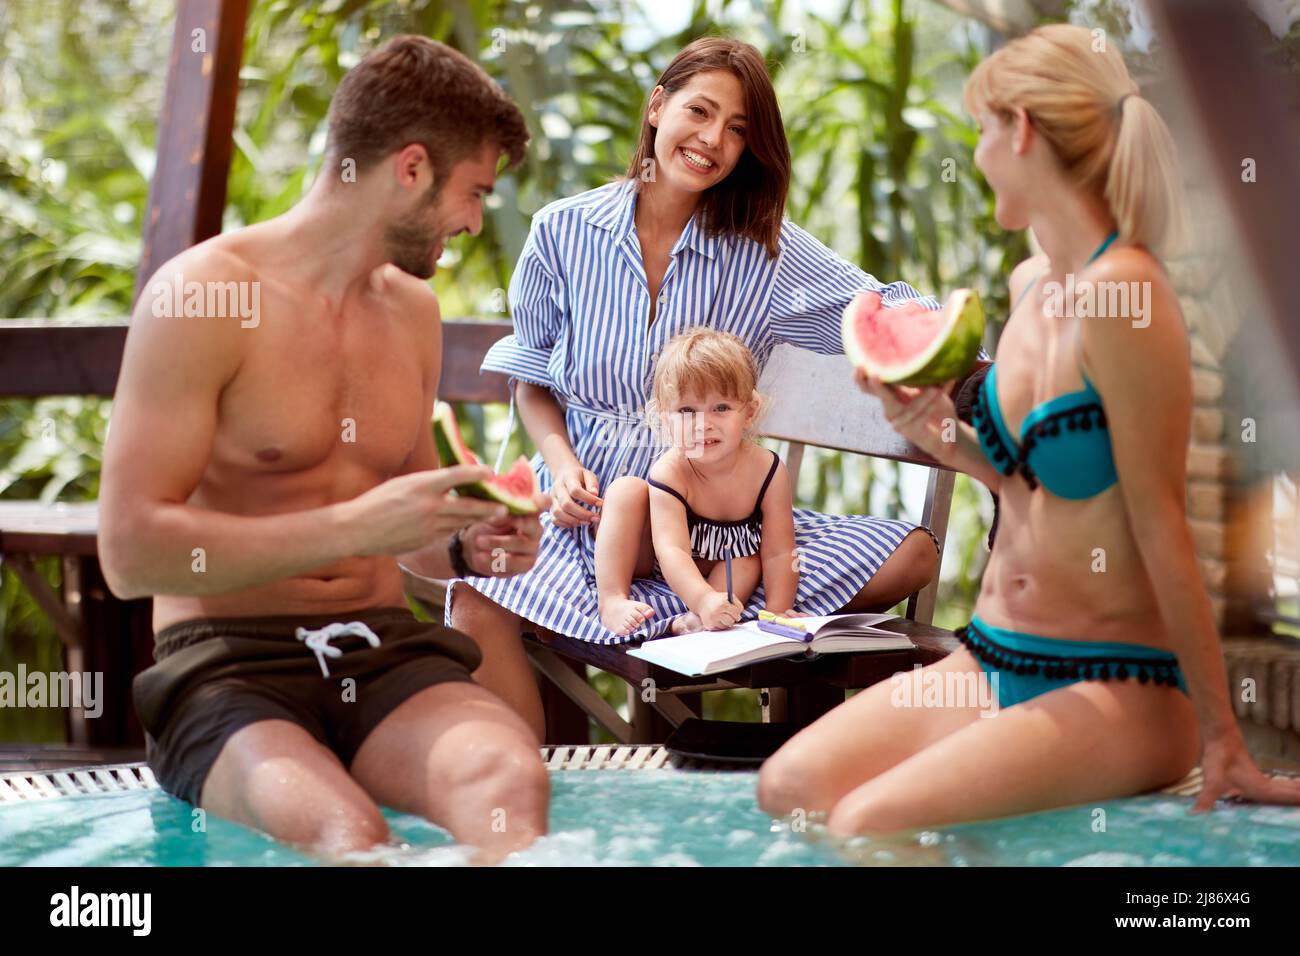 Family with baby citer in summer on pool Stock Photo